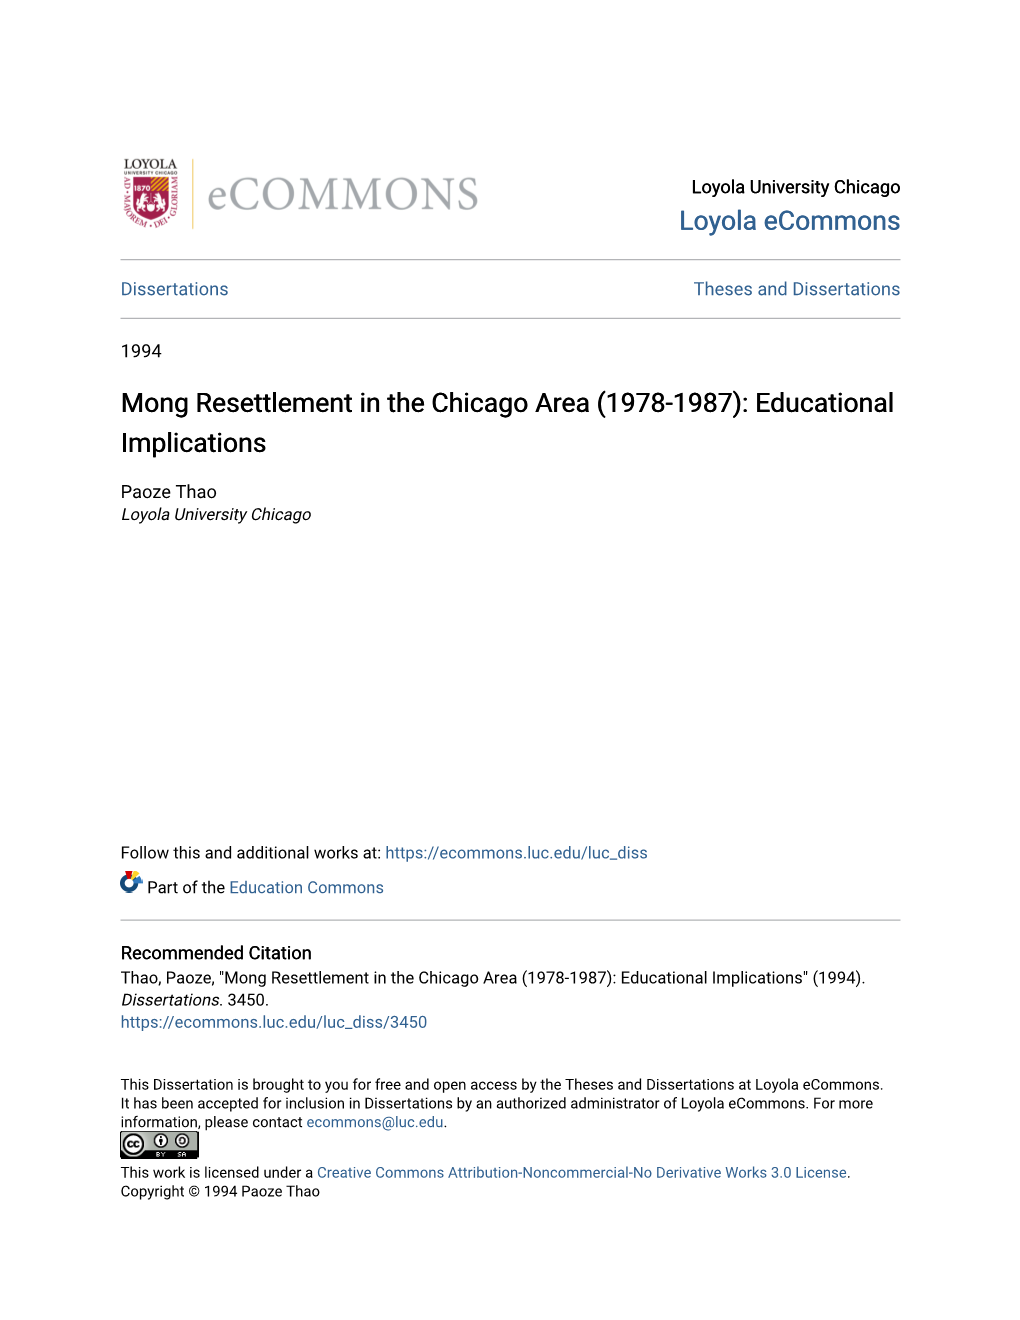 Mong Resettlement in the Chicago Area (1978-1987): Educational Implications